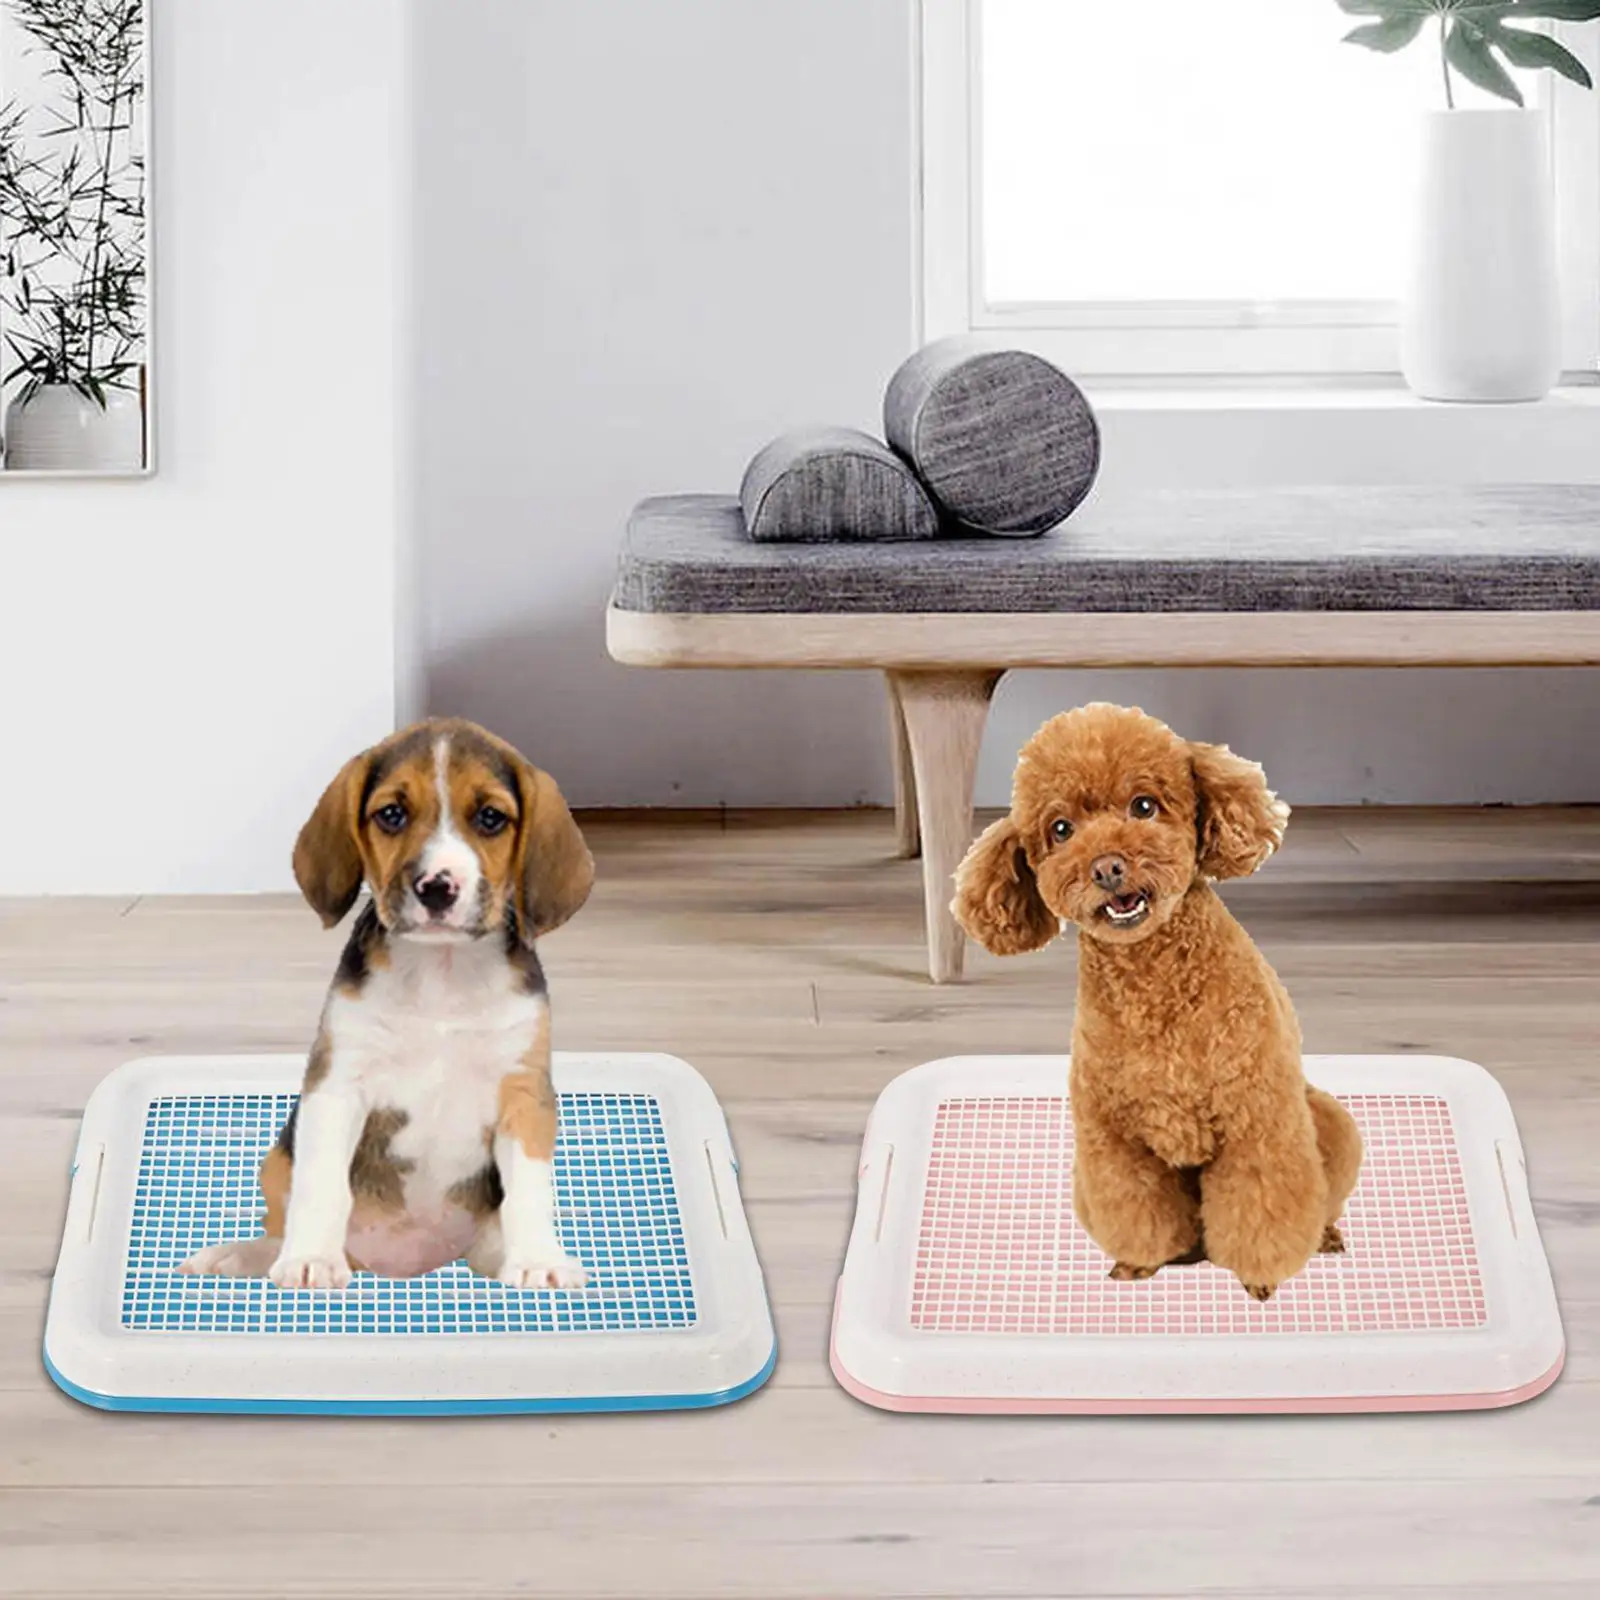 Dog Potty Toilet Training Tray Indoor Outdoor 18.5x13.8 inch Mesh Potty Training Tray Dog Potty Pan for Small Size Dogs Puppies